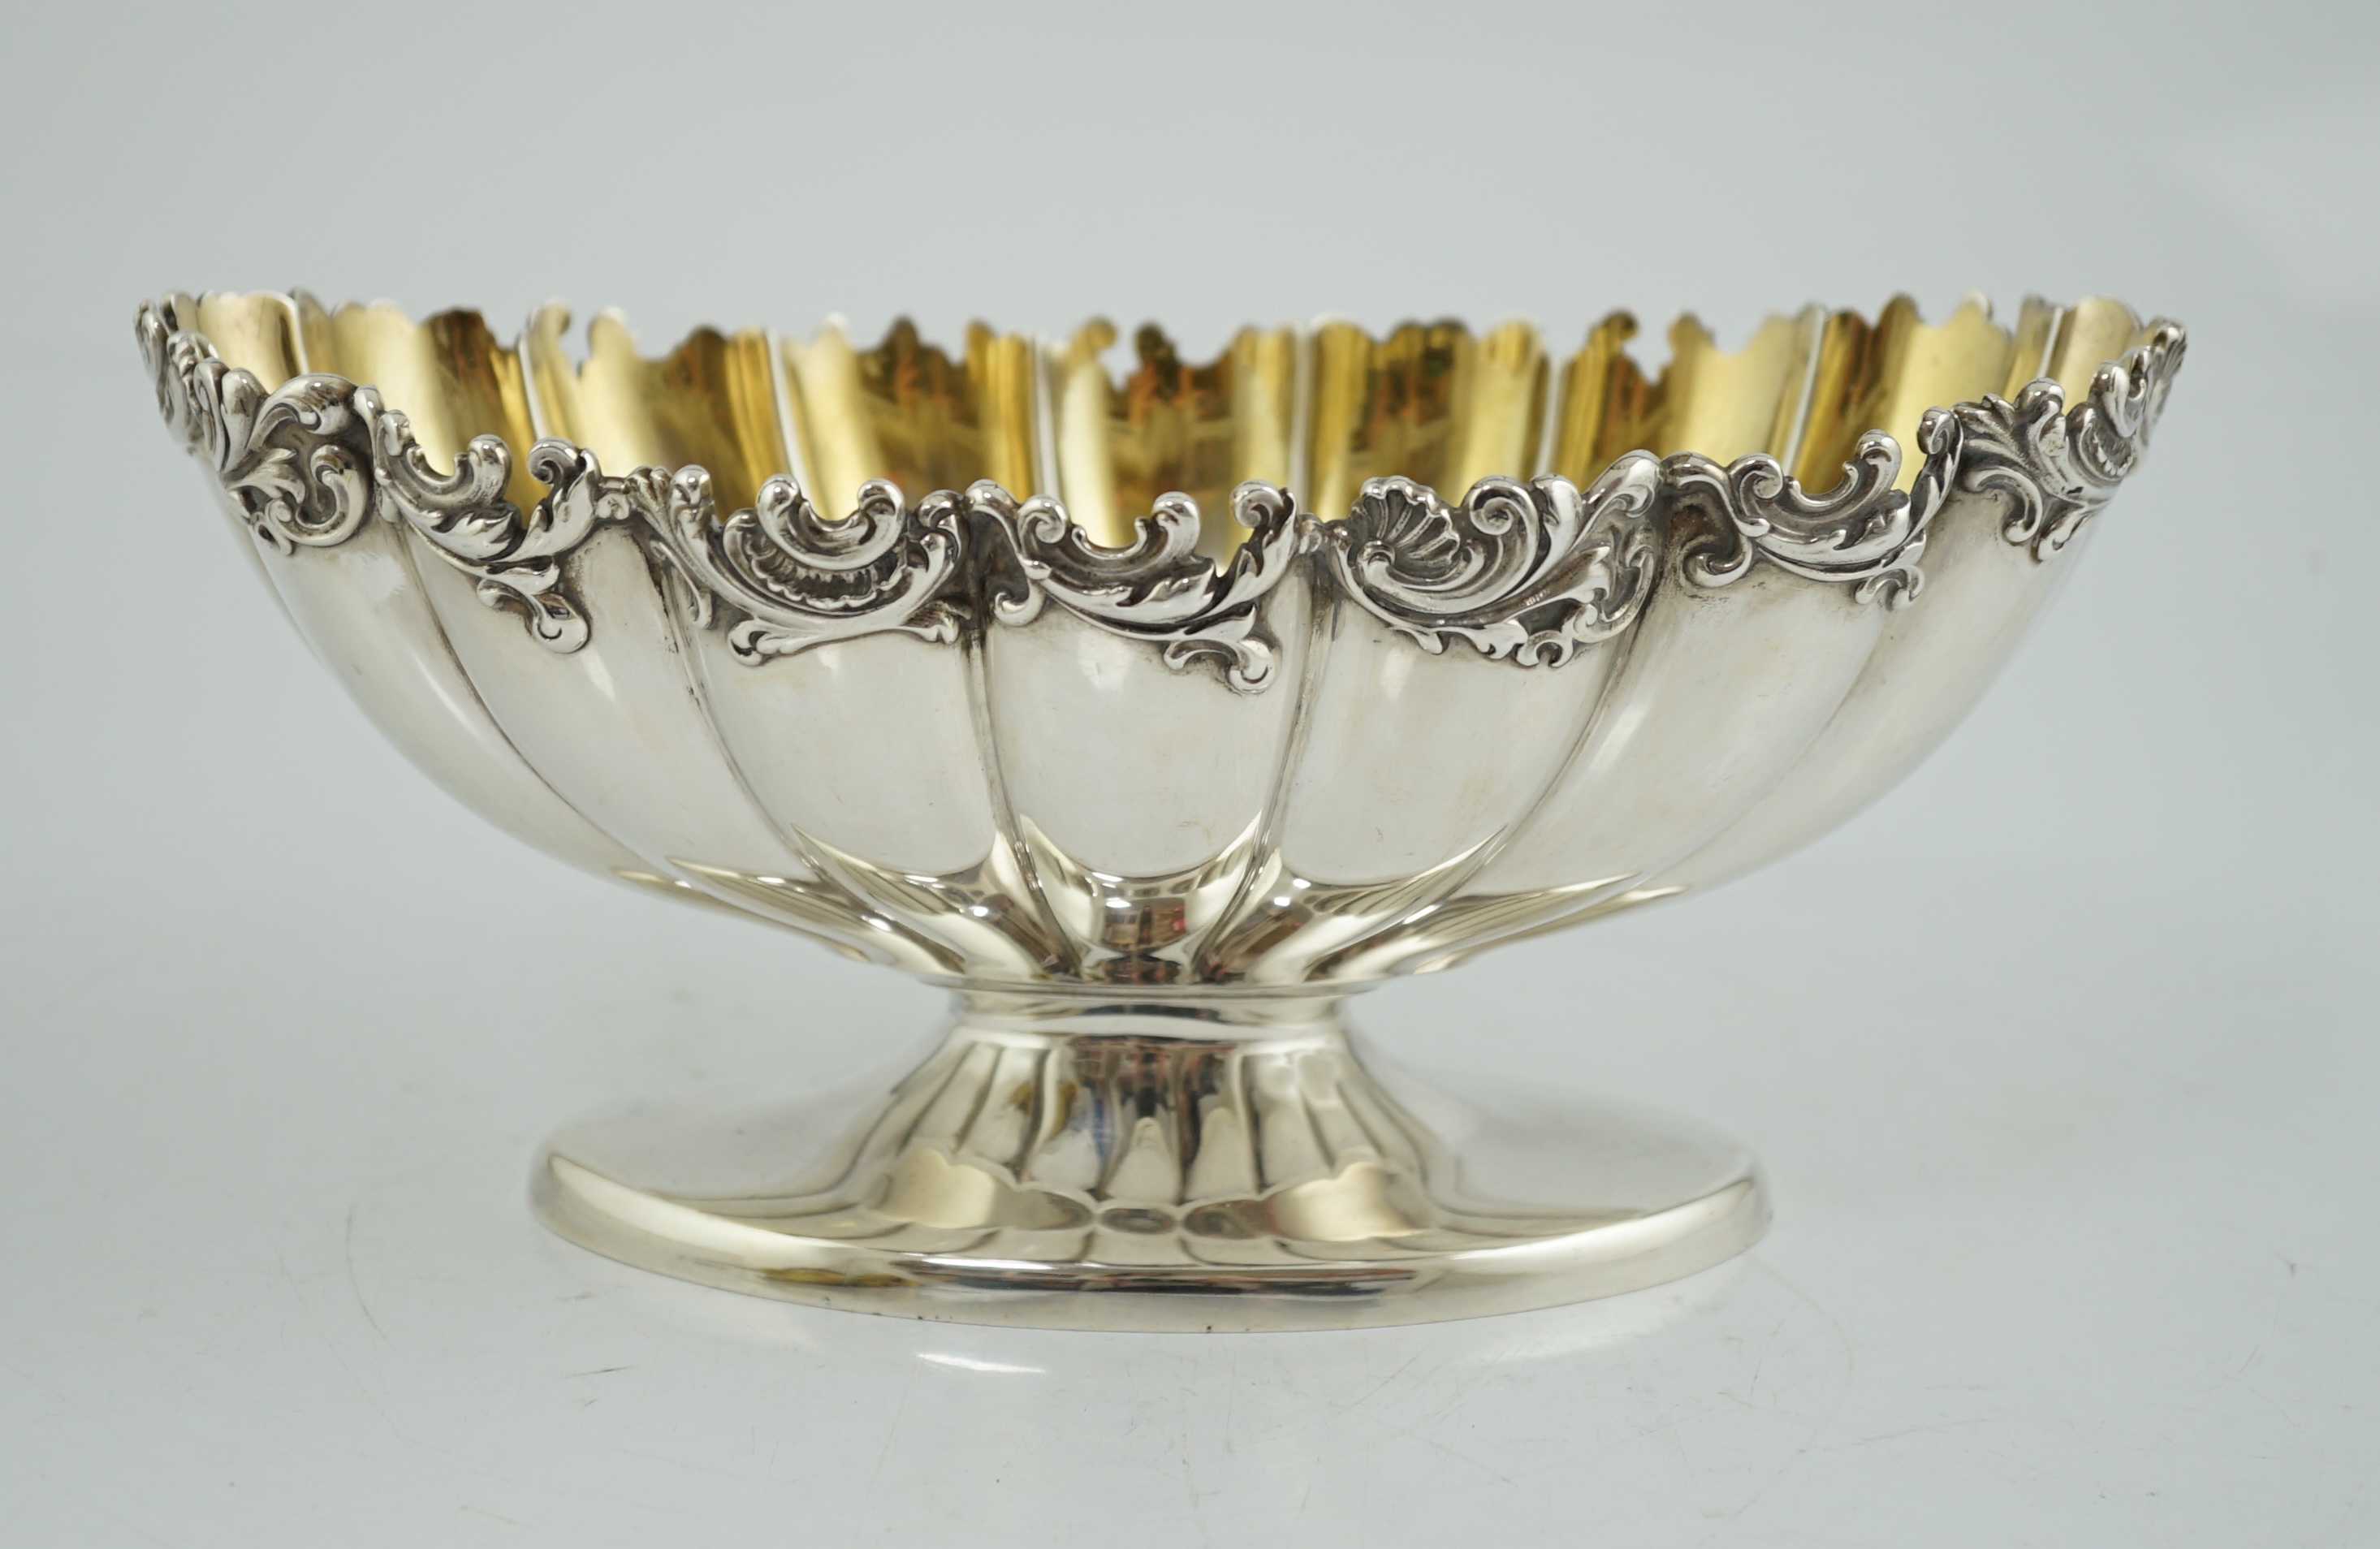 A late 19th century American sterling silver oval pedestal bowl, by Gorham Manufacturing Co